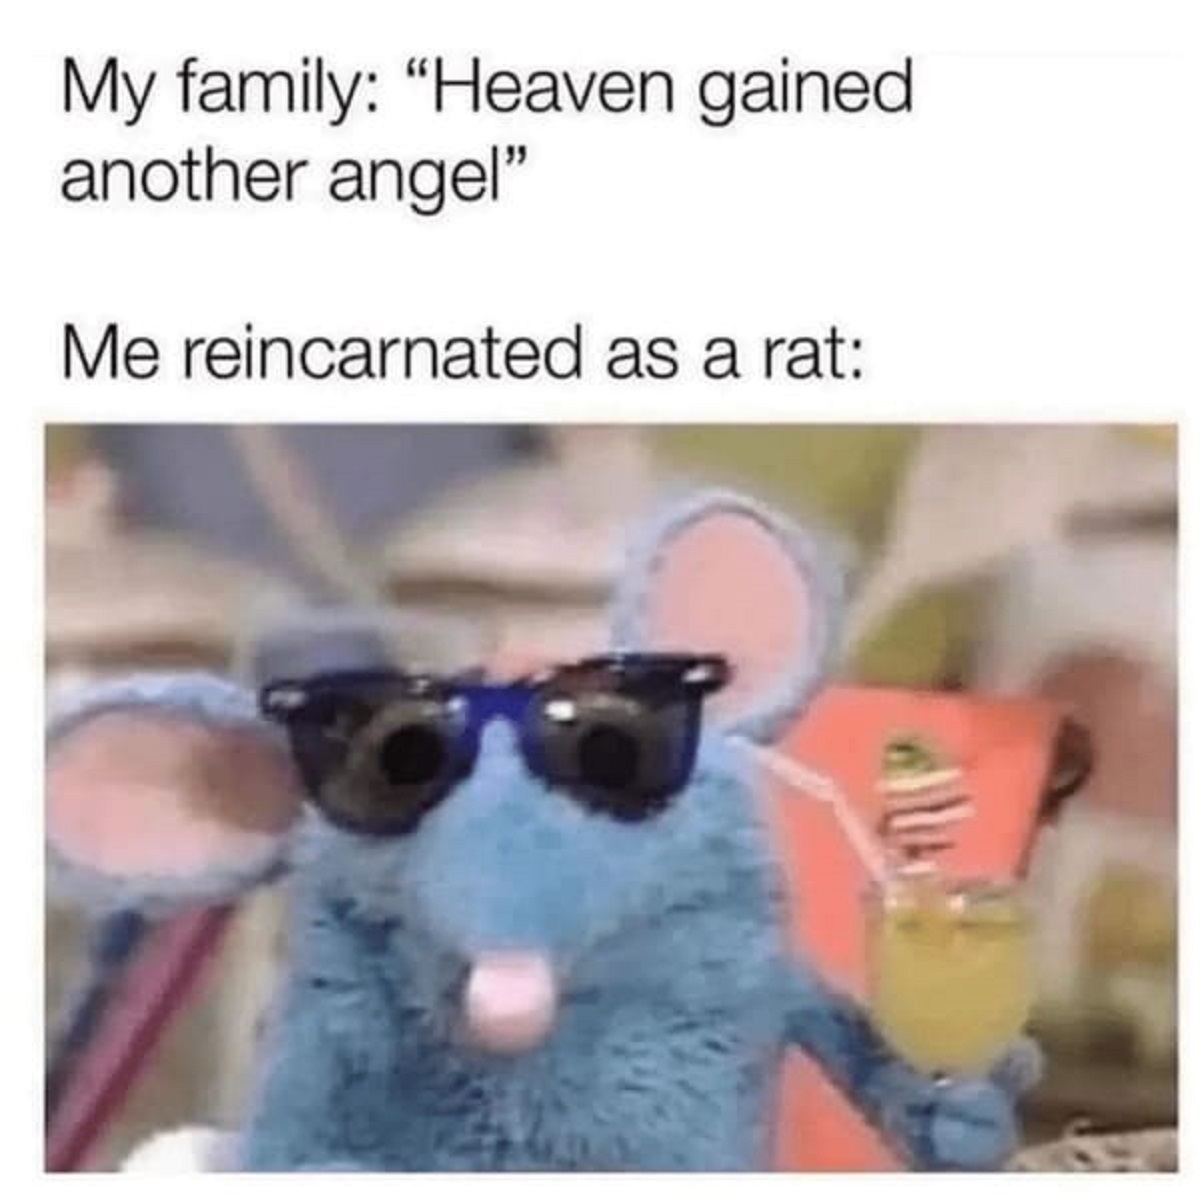 me reincarnated as a rat - My family "Heaven gained another angel" Me reincarnated as a rat